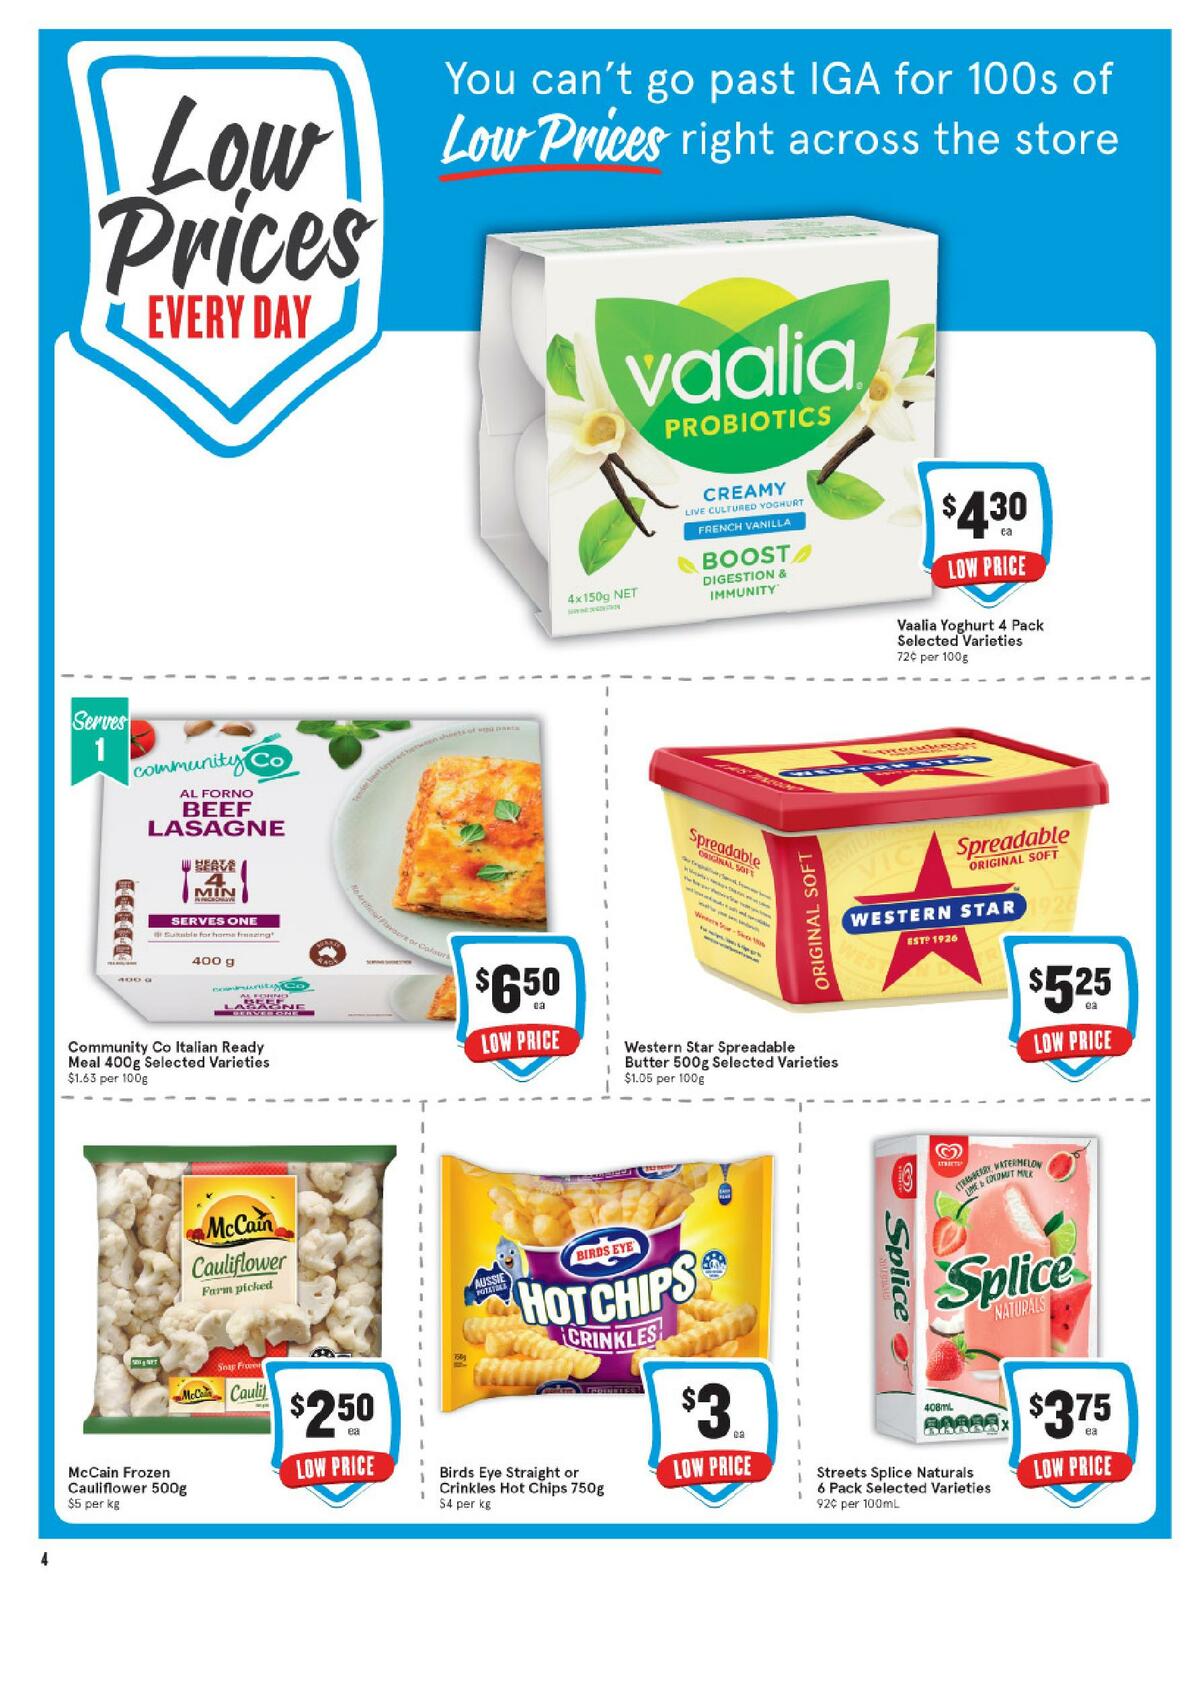 IGA Catalogues from 2 June